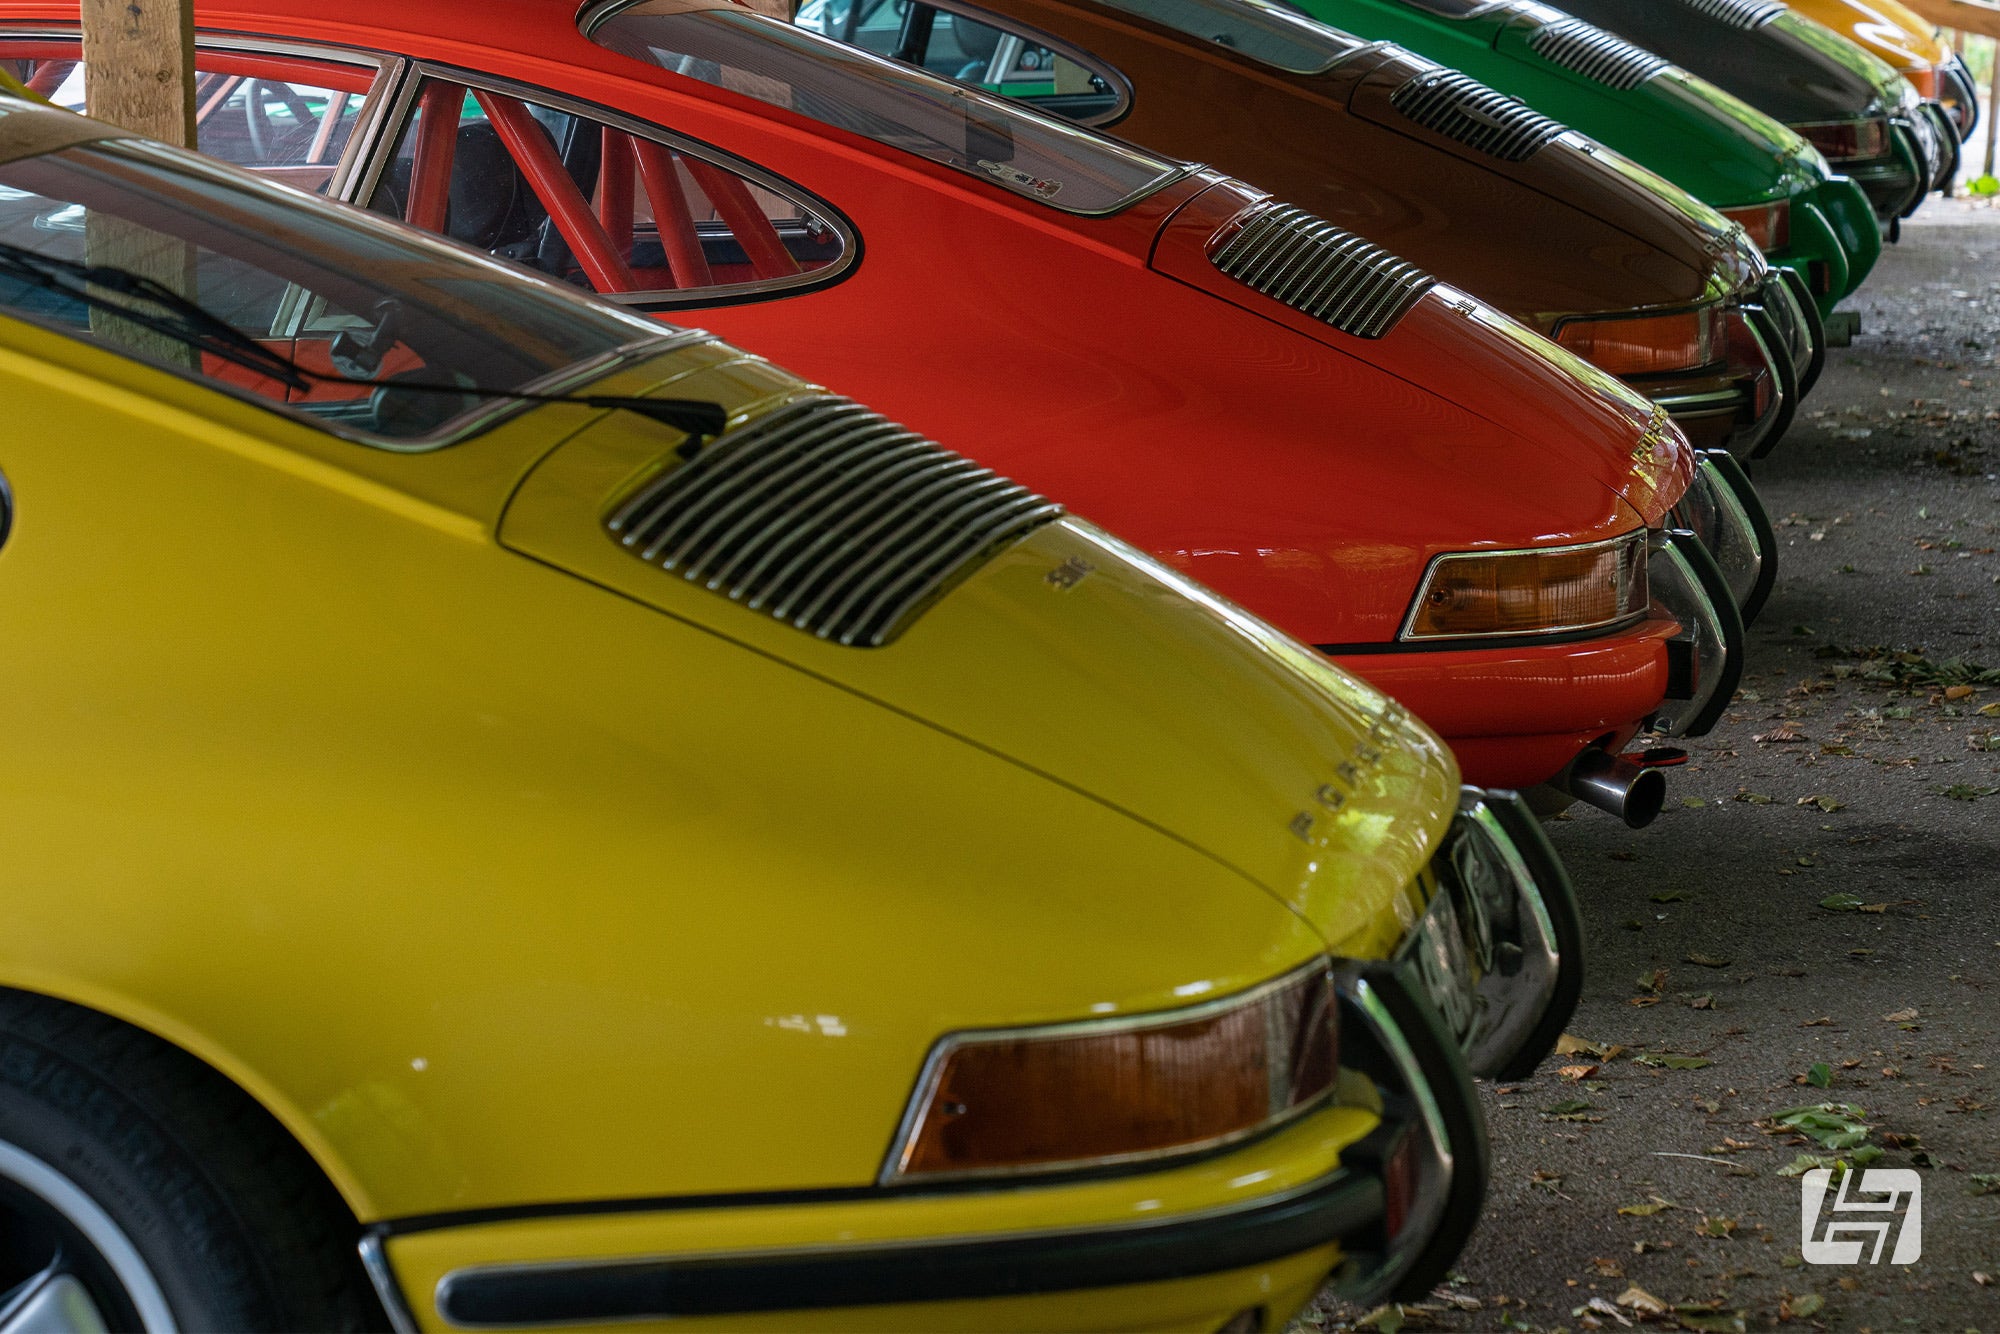 Line up of colourful classic Porsche 911 models parked at Goodwood